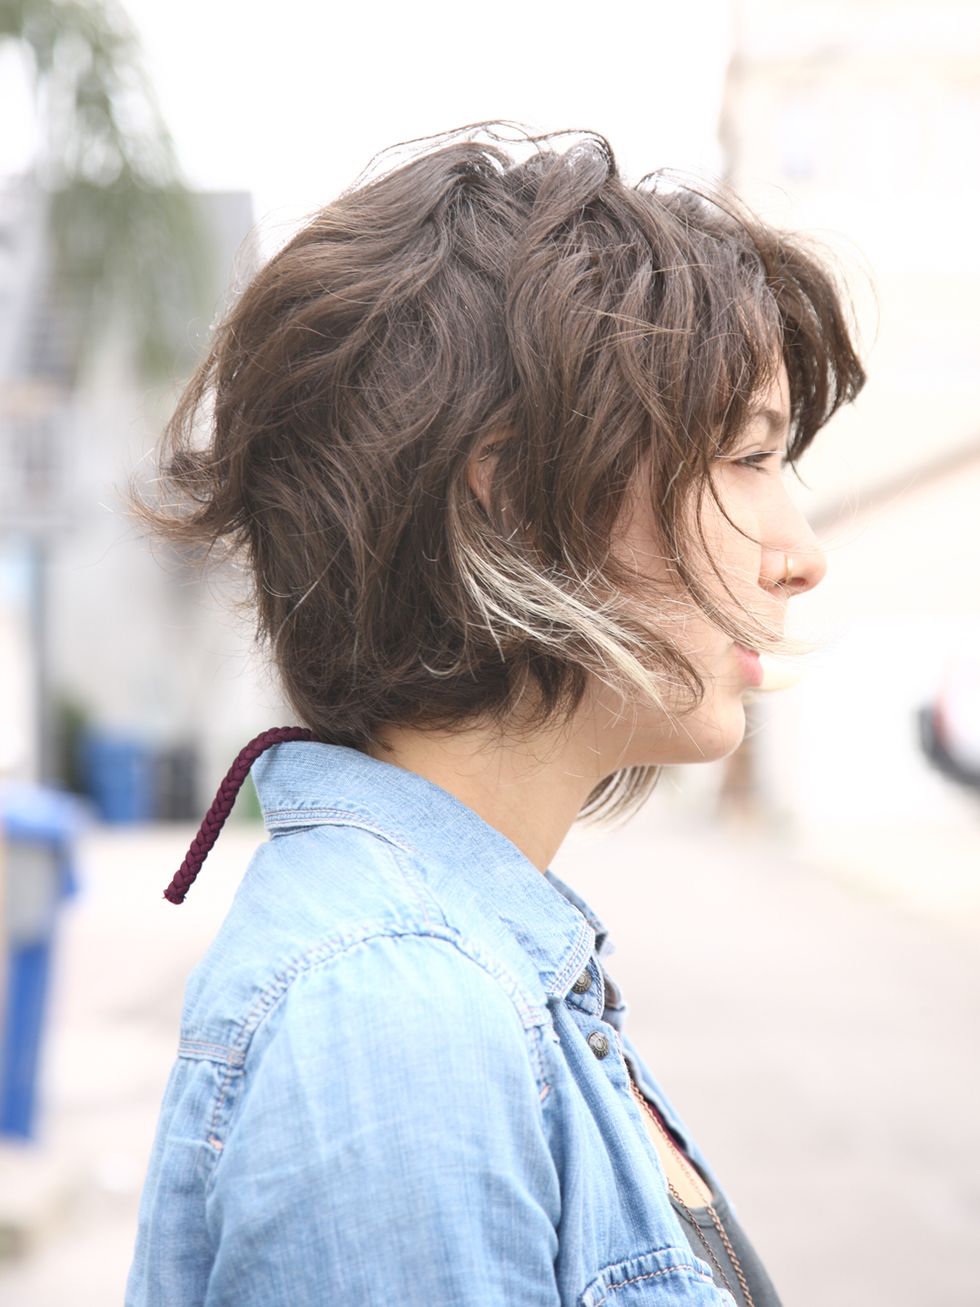 Hairstyle, Shirt, Style, Street fashion, Denim, Brown hair, Bangs, Portrait photography, Feathered hair, Hair coloring, 